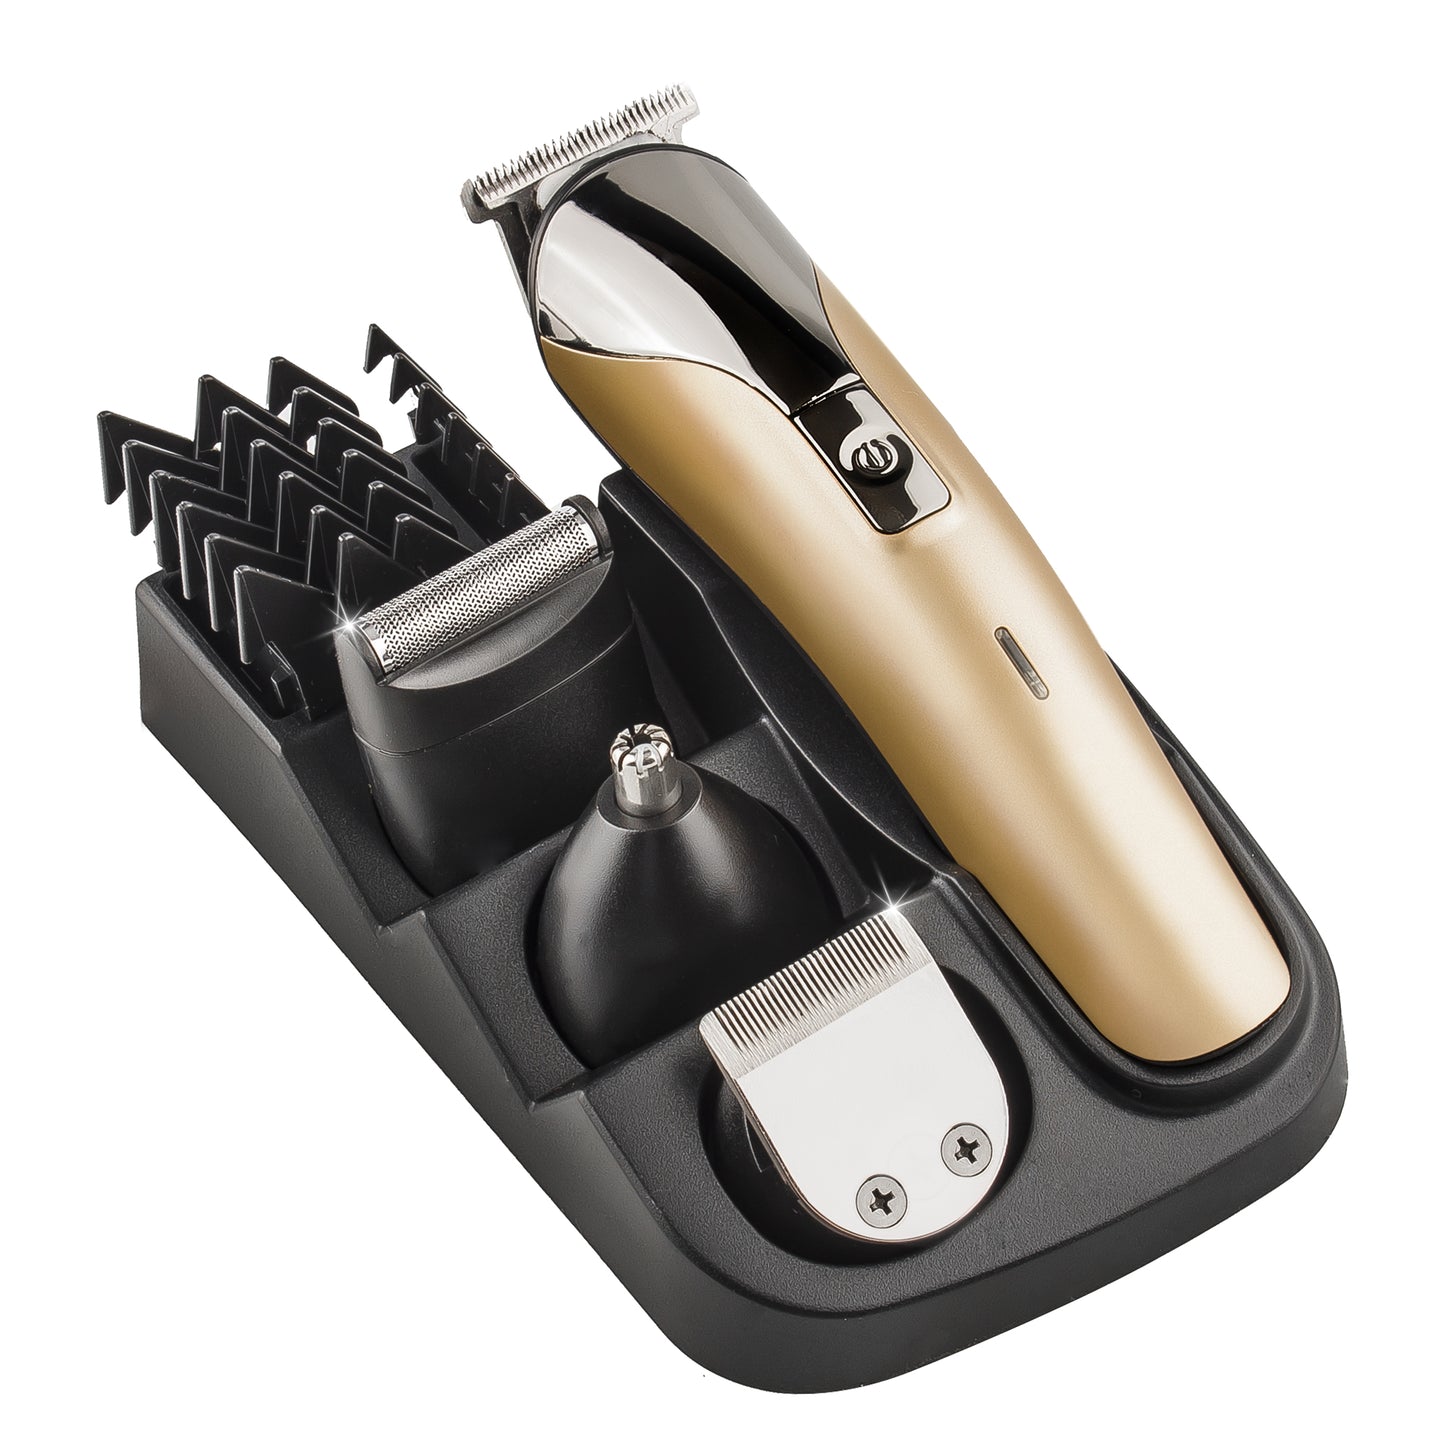 MULTIFUNCTION HAIR CUTTER 5W 8 IN 1 RECHARGEABLE 